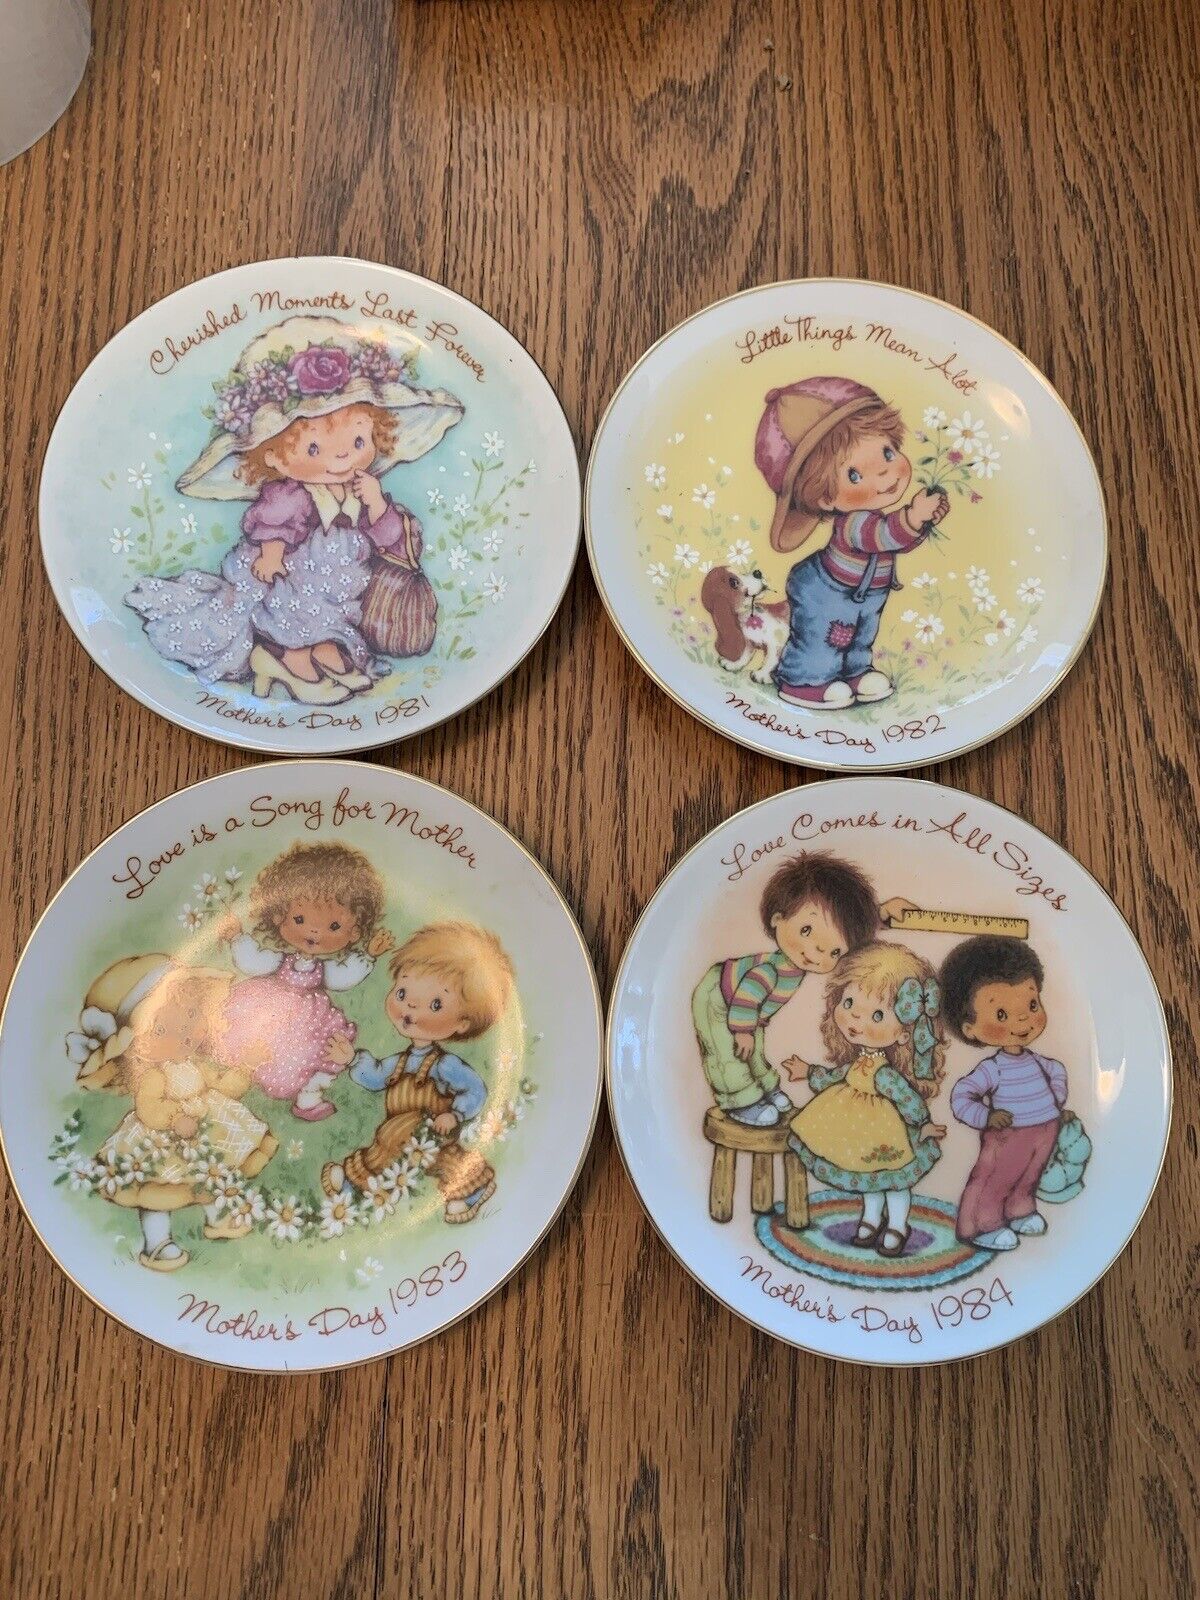 Vintage 5” Avon Mothers Day Collectible Plates Lot of 4  Plates 1981-1984